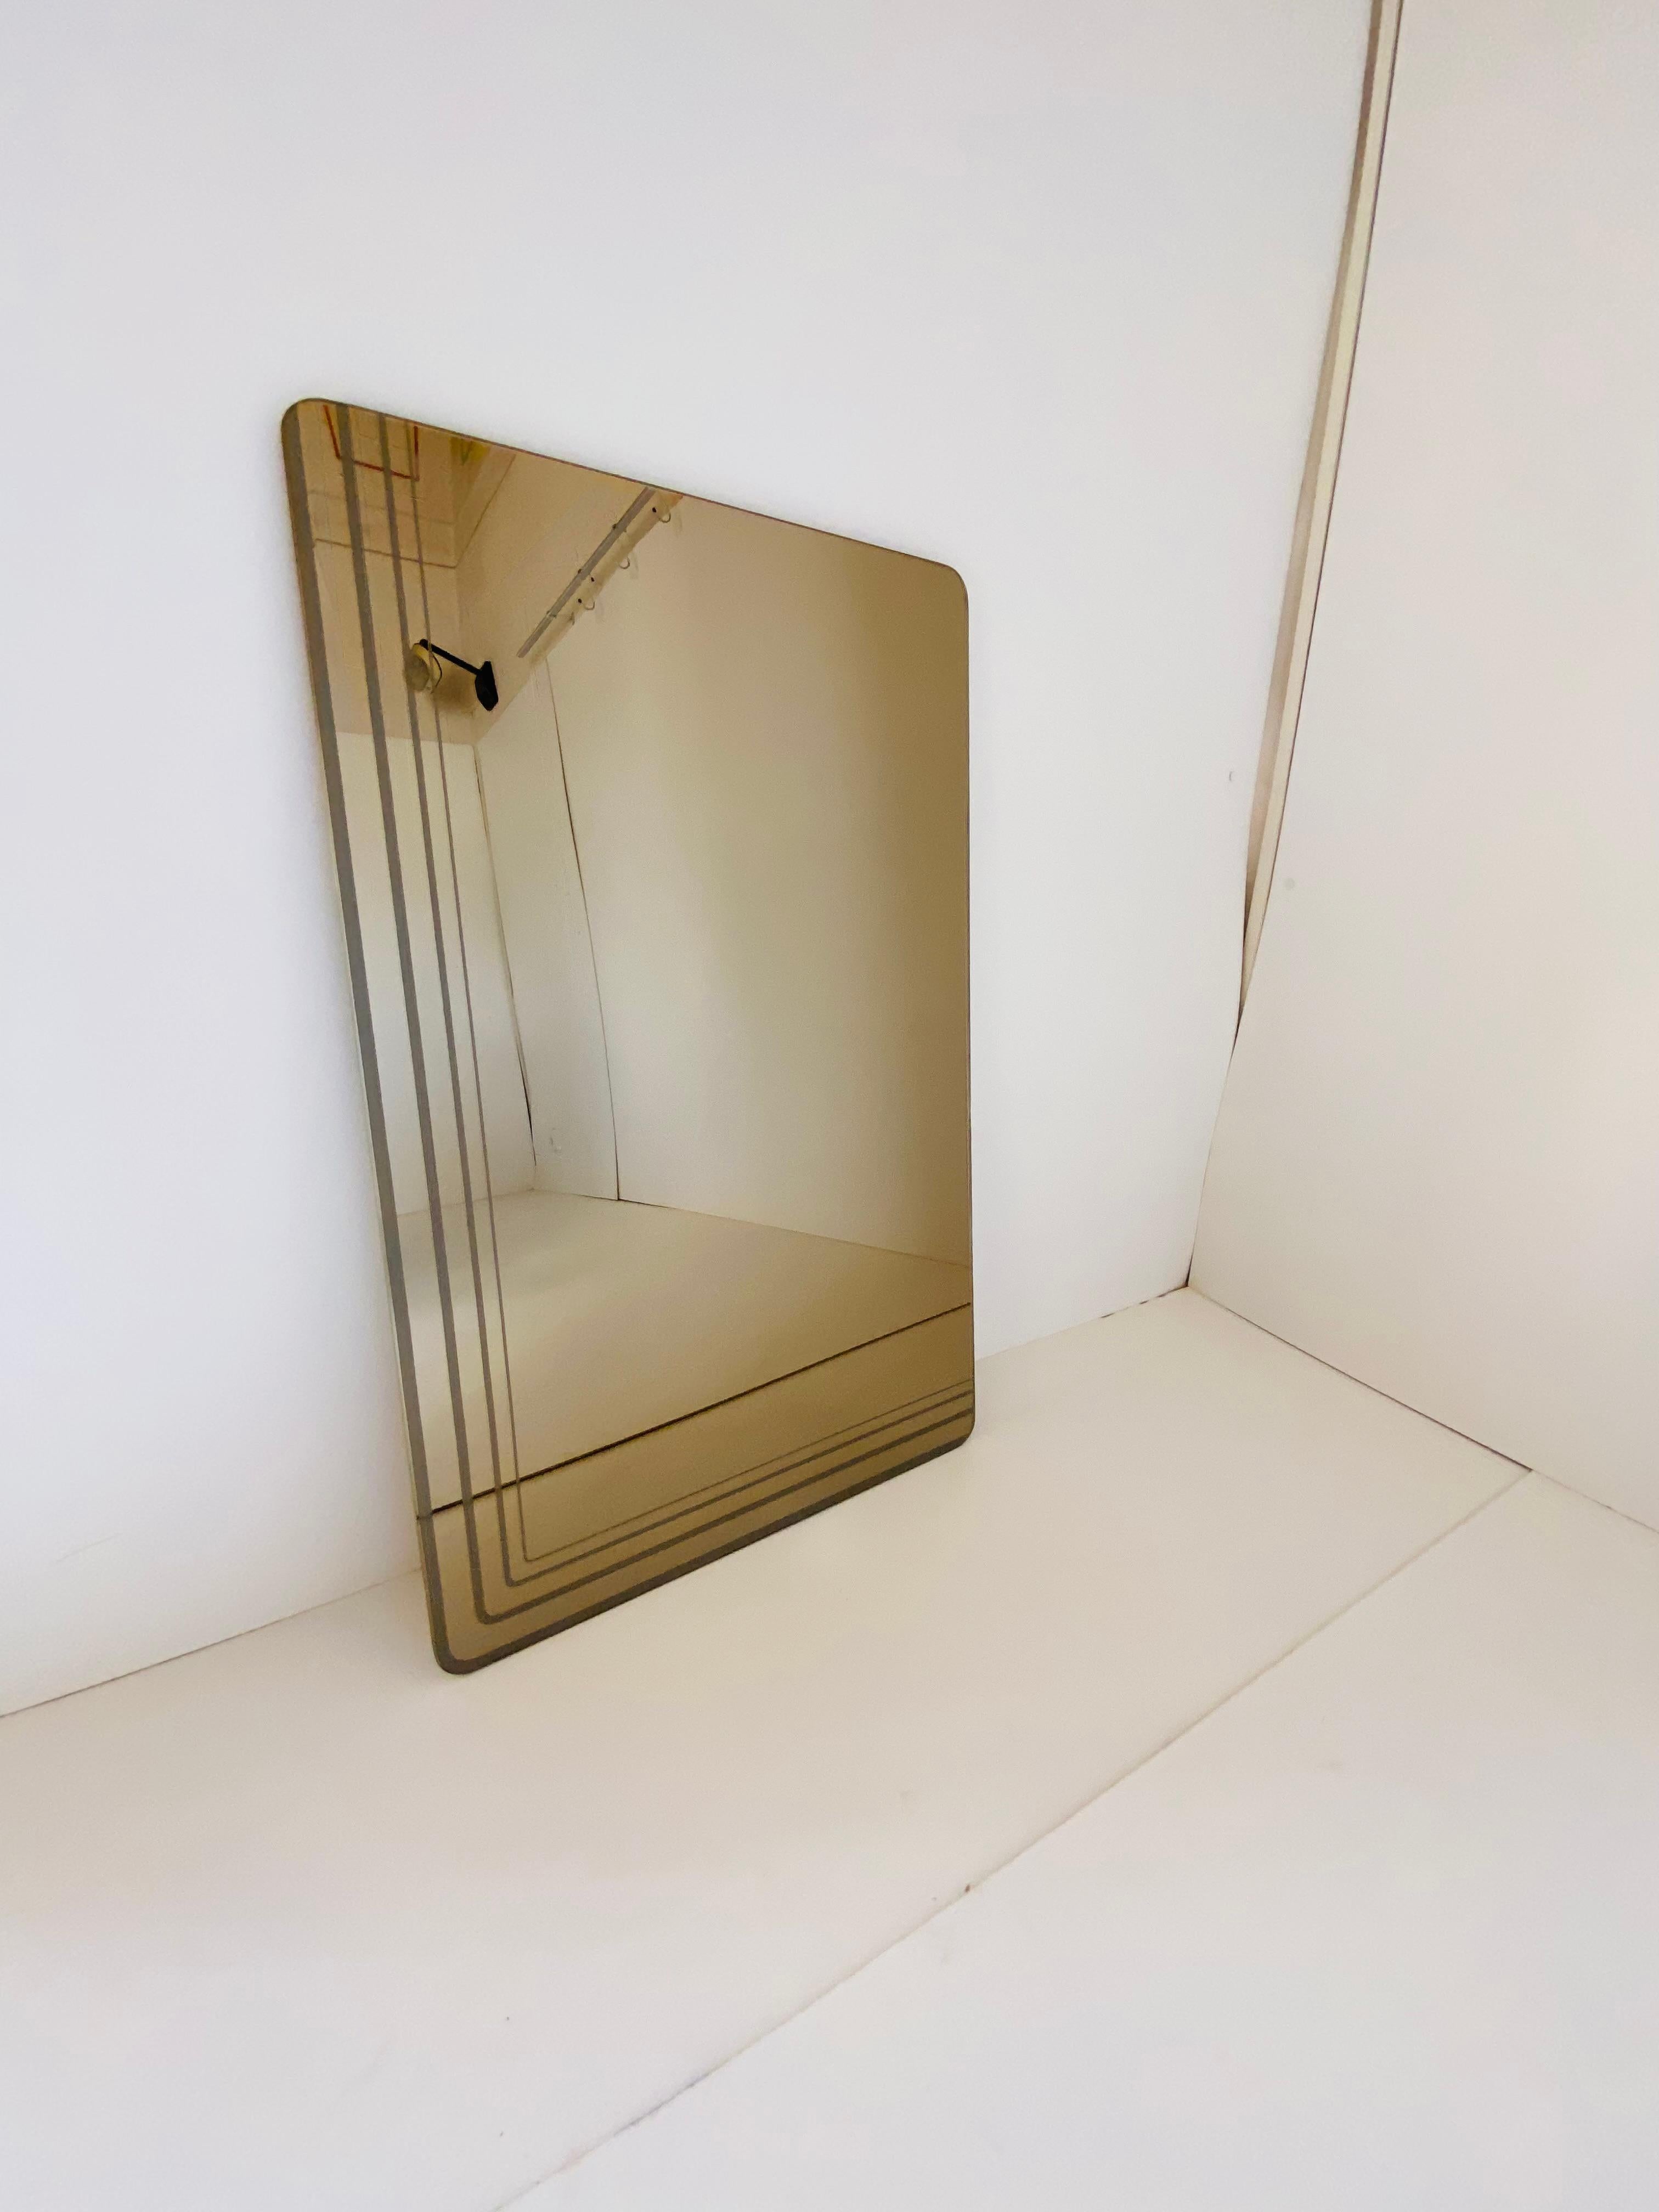 Midcentury Modern Minimal Rectangular Mirror, Italy 1970's

Vintage minimalist rectangular mirror in space age Style. Manufactured in Italy in the 1970 's 
1970s vintage minimal wall mirror. Rectangular shaped with beautiful stripe on the glass. In